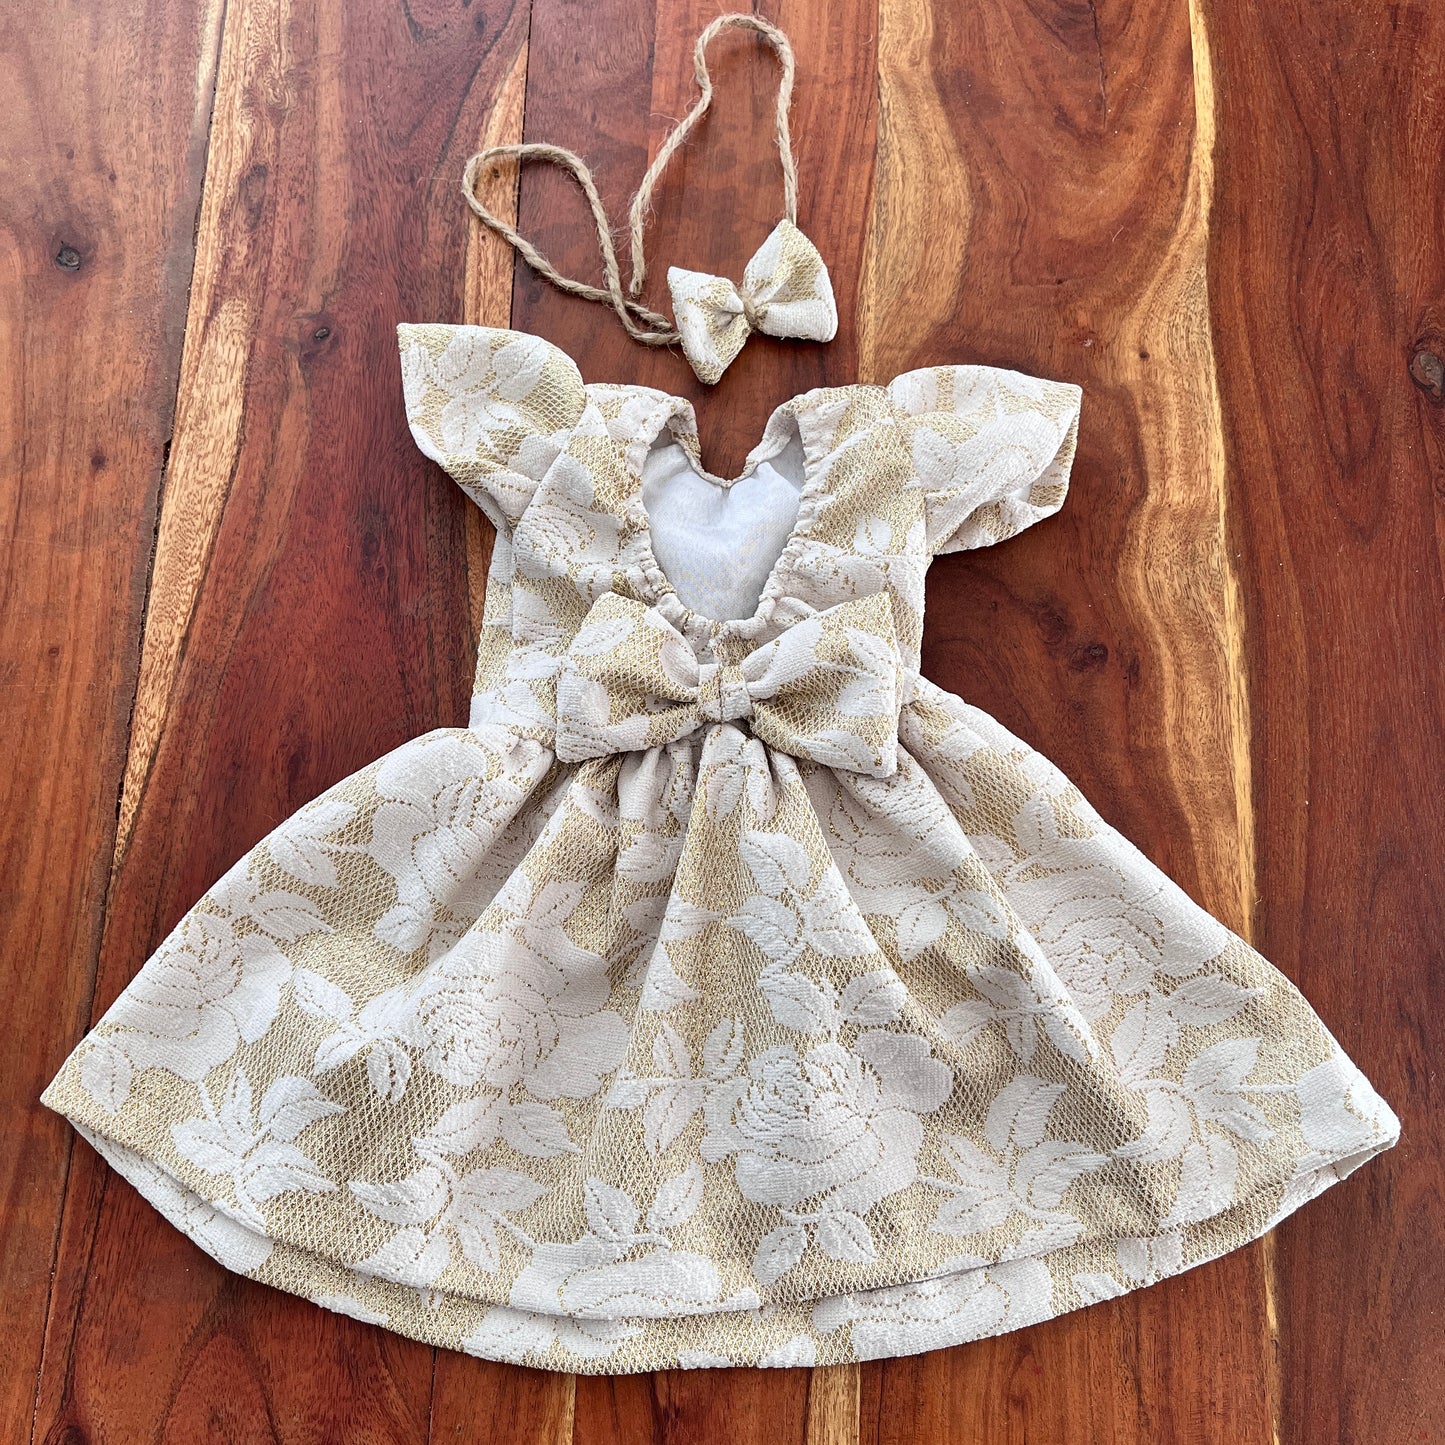 Gold rose Dress Newborn Photography Prop Outfit For Girl